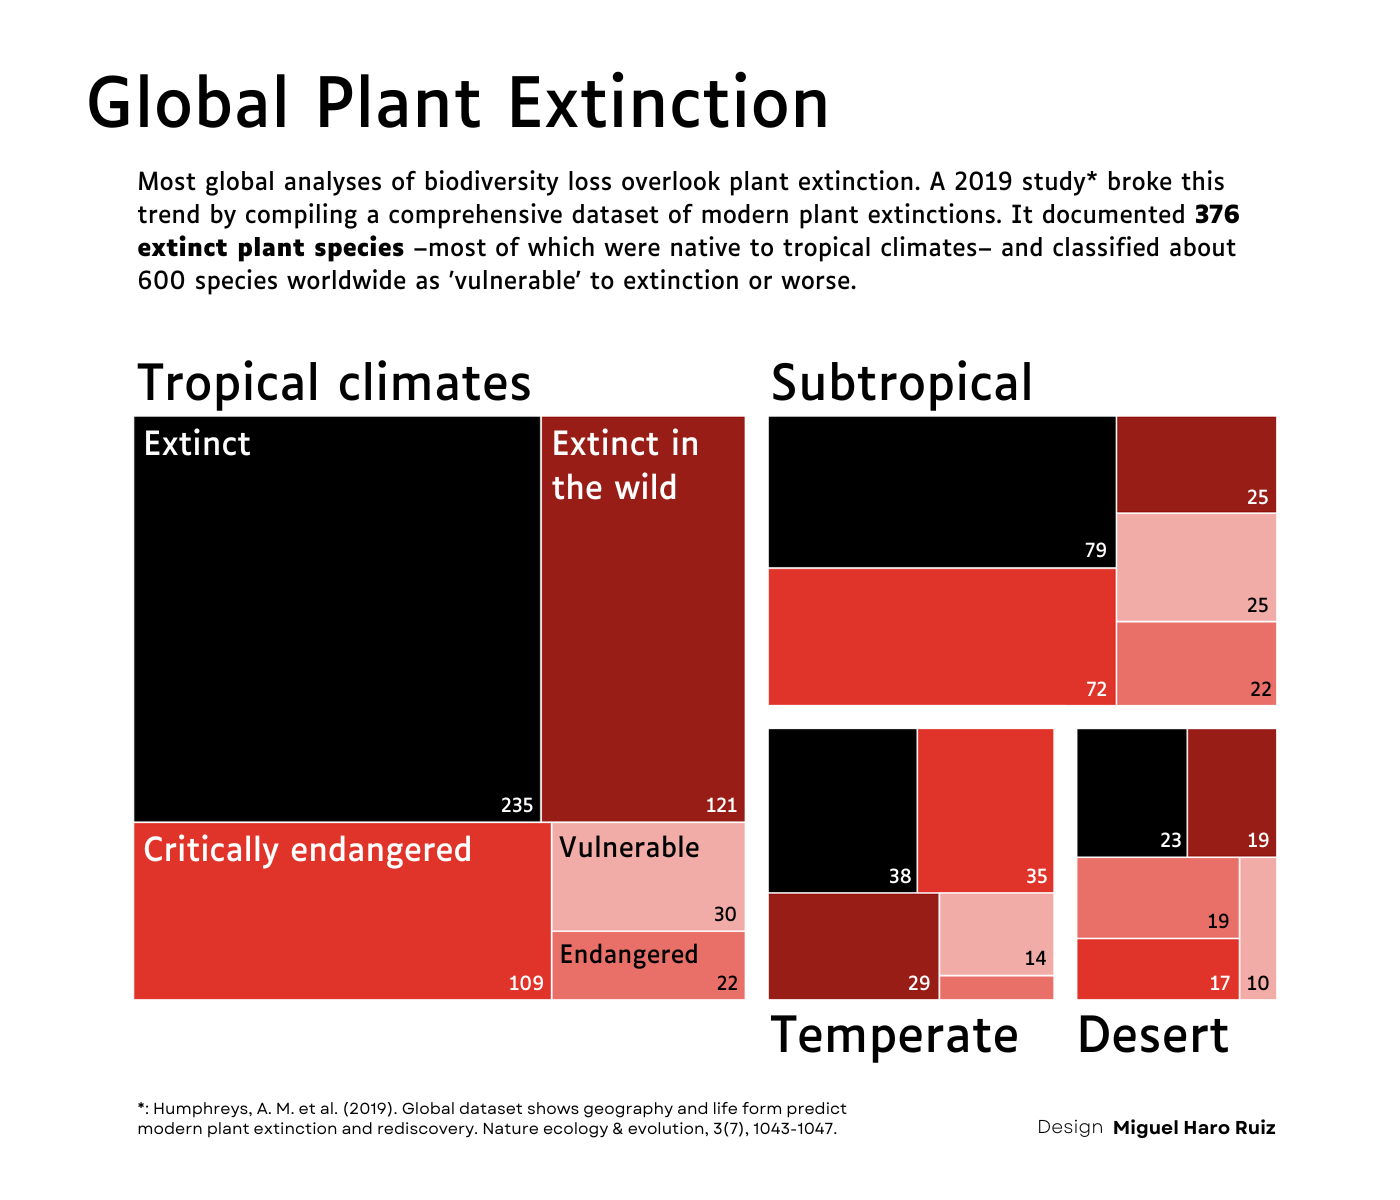 A treemap chart showing extint and at-risk plan species in 4 different global ecosystems.